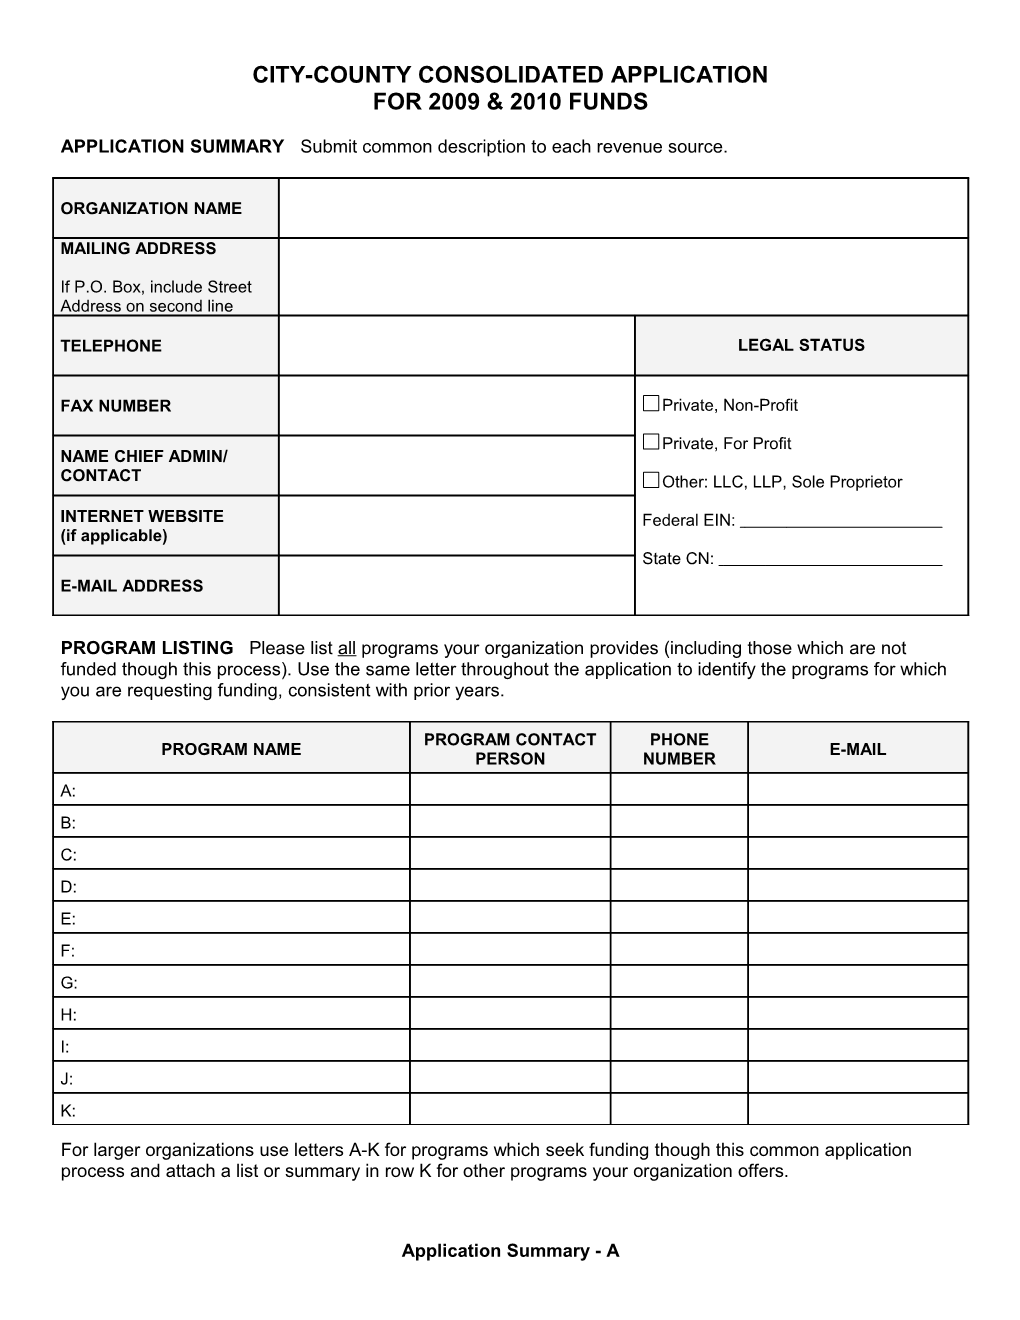 City-County-United Way Consolidated Application for 1999 Funds Page 1